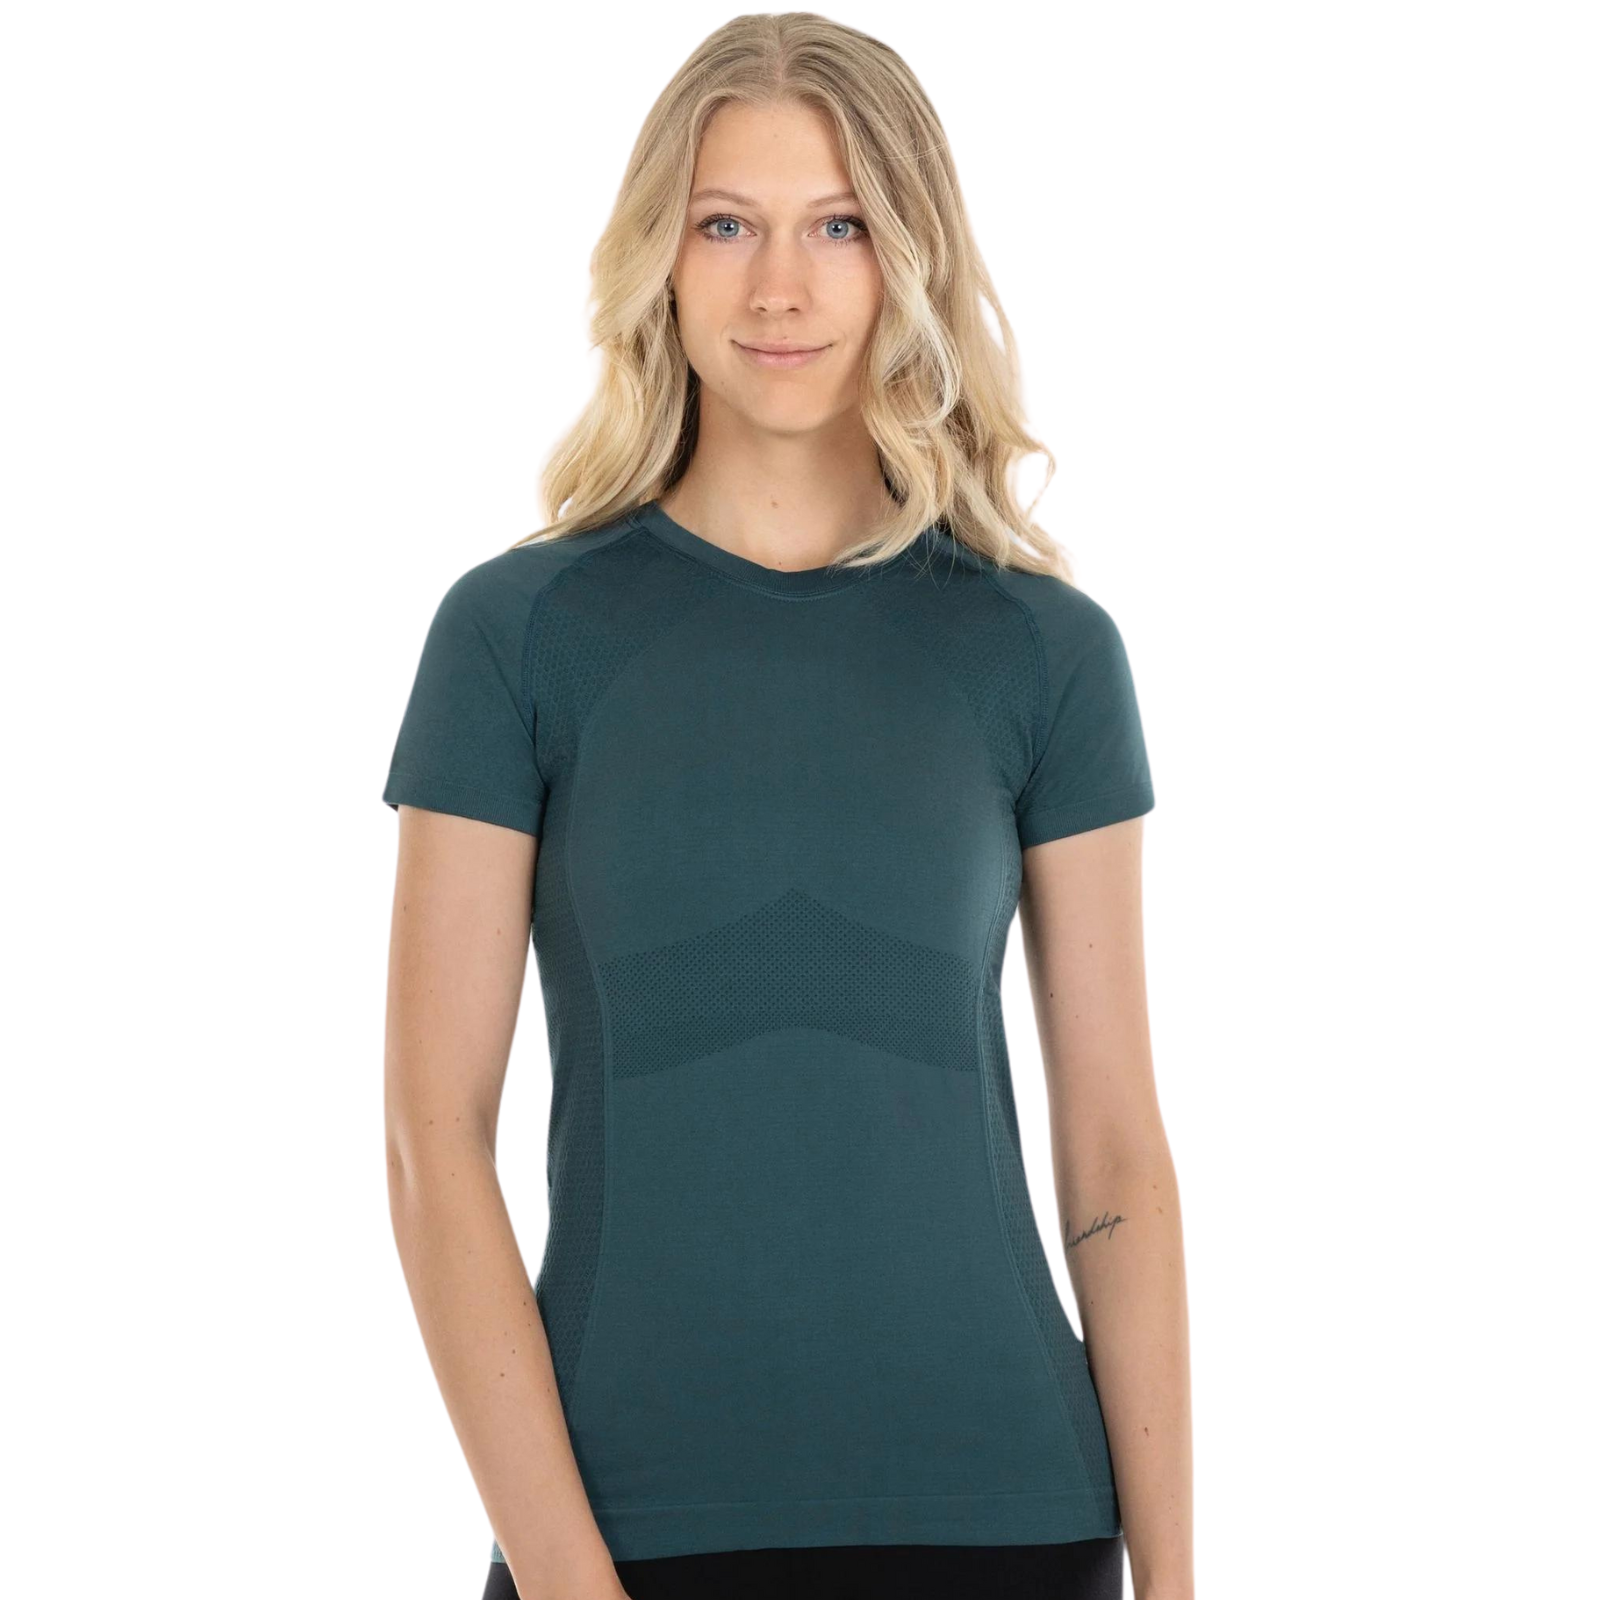 Anique Short Sleeve Crew Shirt in Peppermint